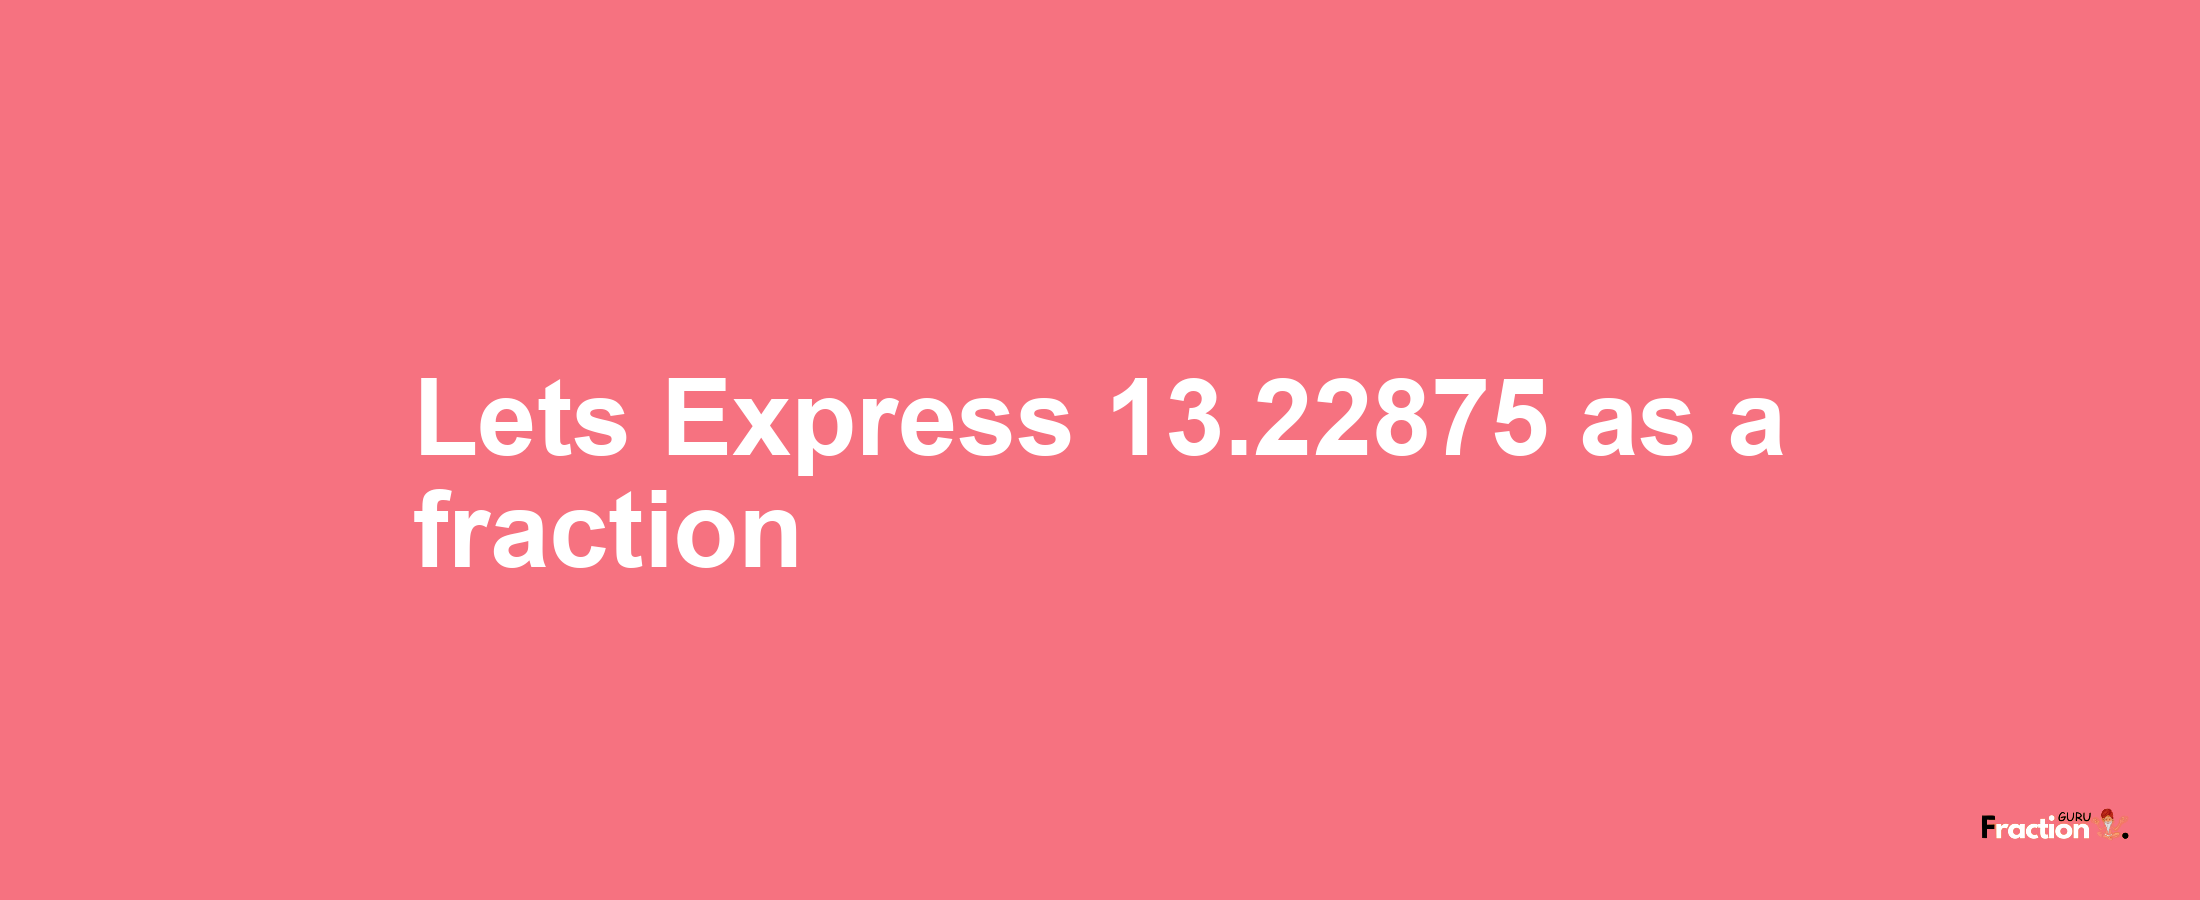 Lets Express 13.22875 as afraction